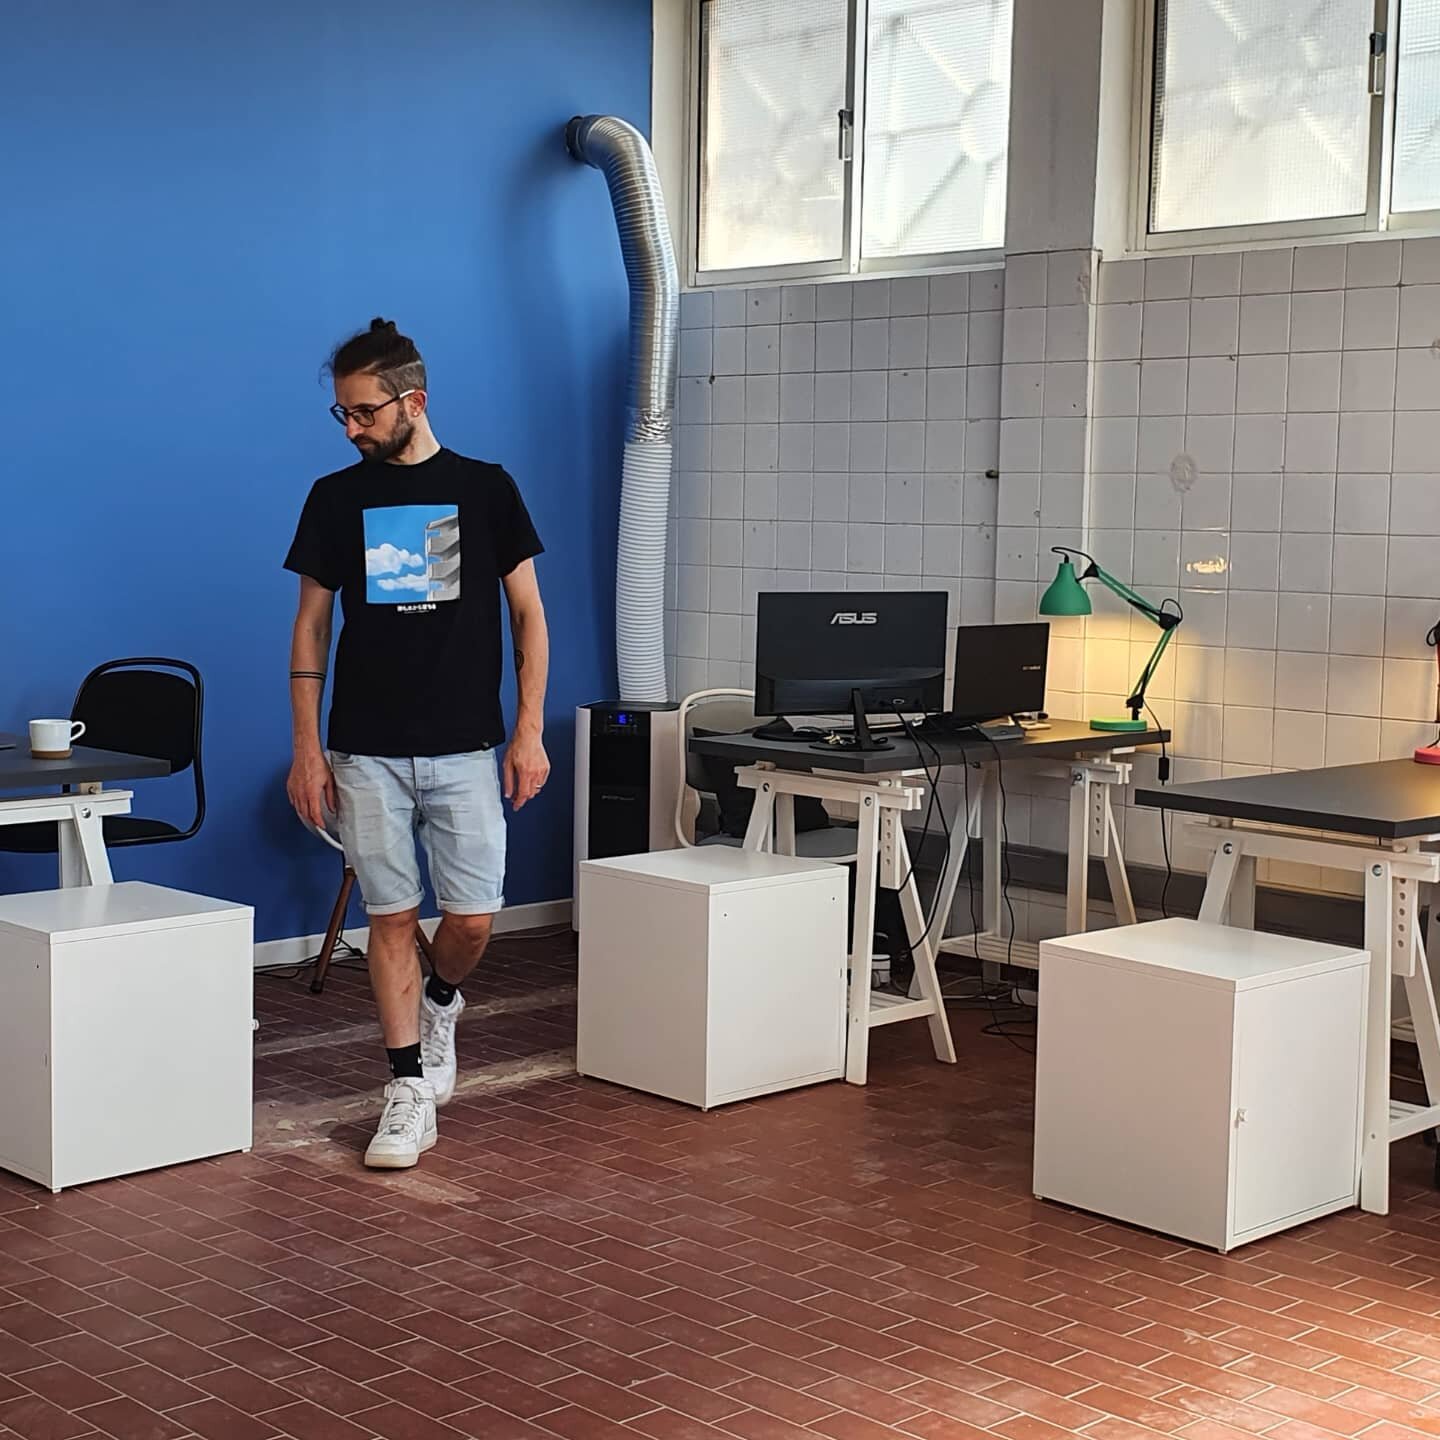 Coworking desks and spaces are available on a daily or monthly basis. If you need a place to work in Barreiro, please get in touch and leave us a message!